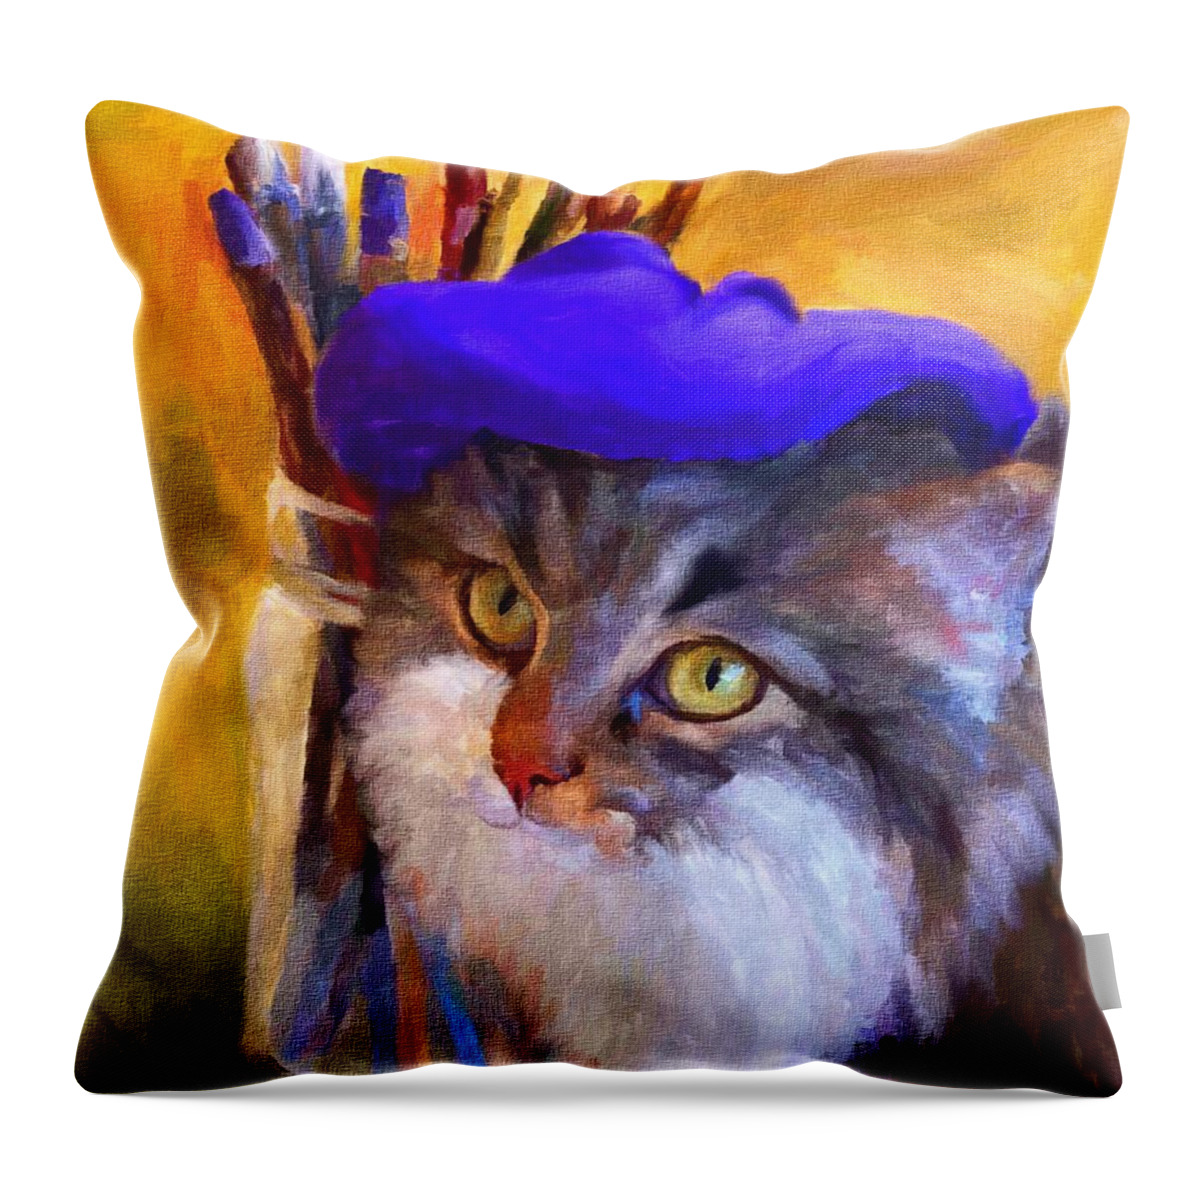 Cat Throw Pillow featuring the painting The Artist by Jai Johnson